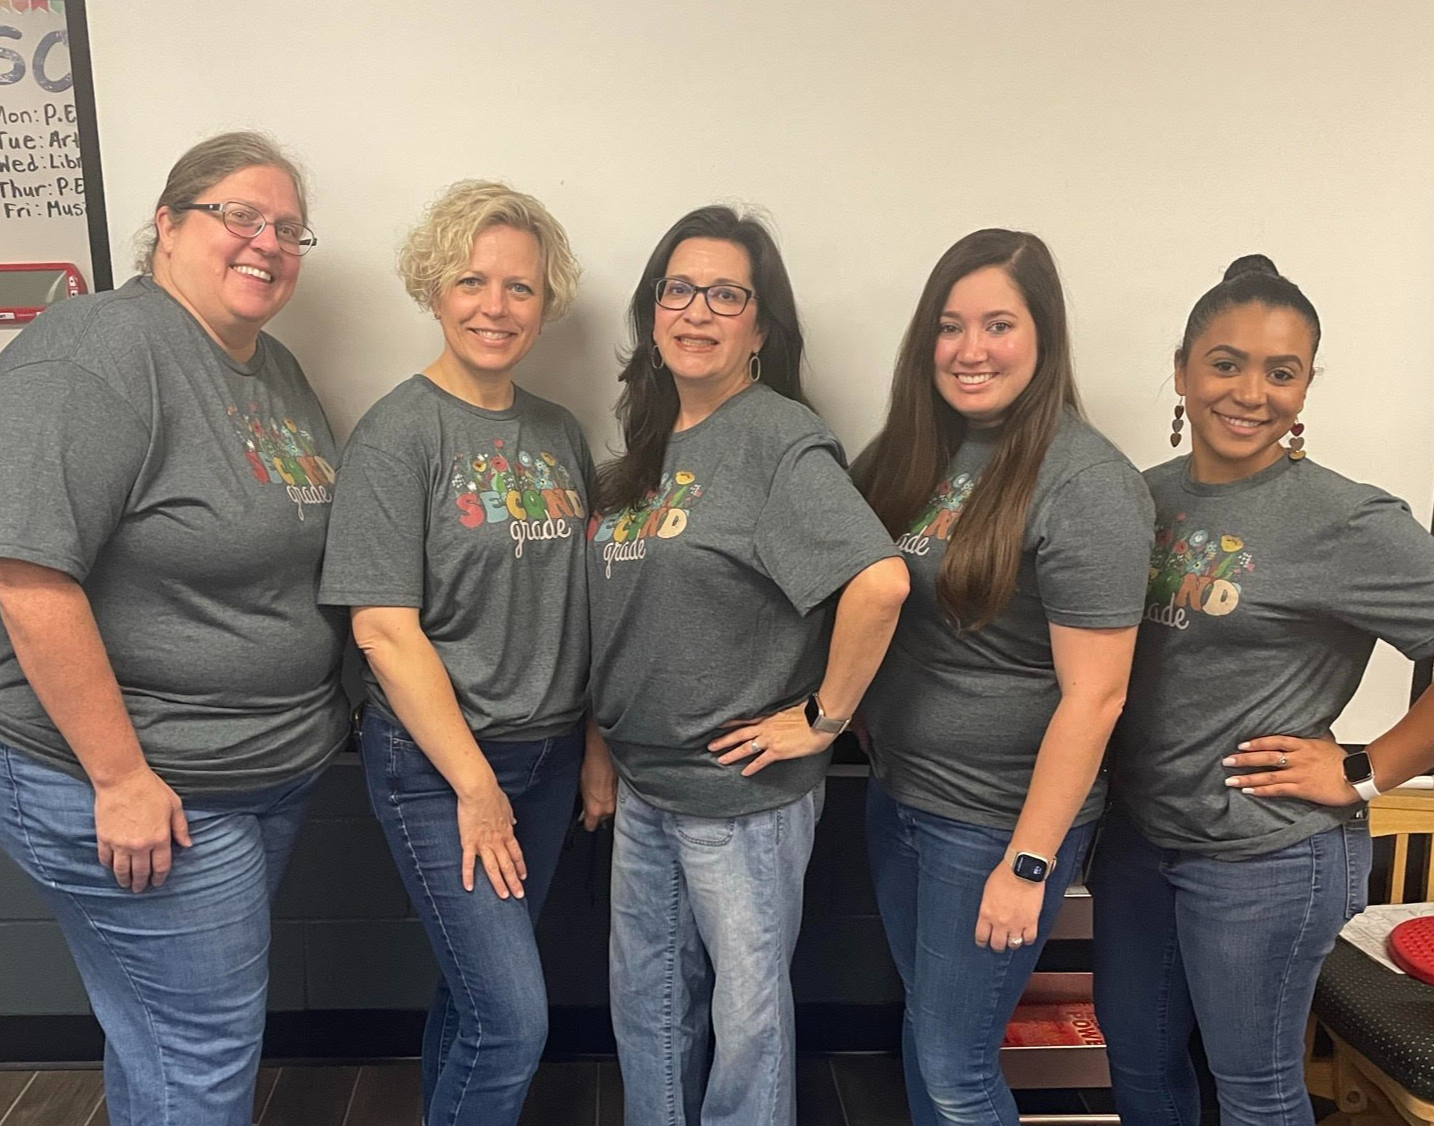 group of ladies in gray shirts standing posing